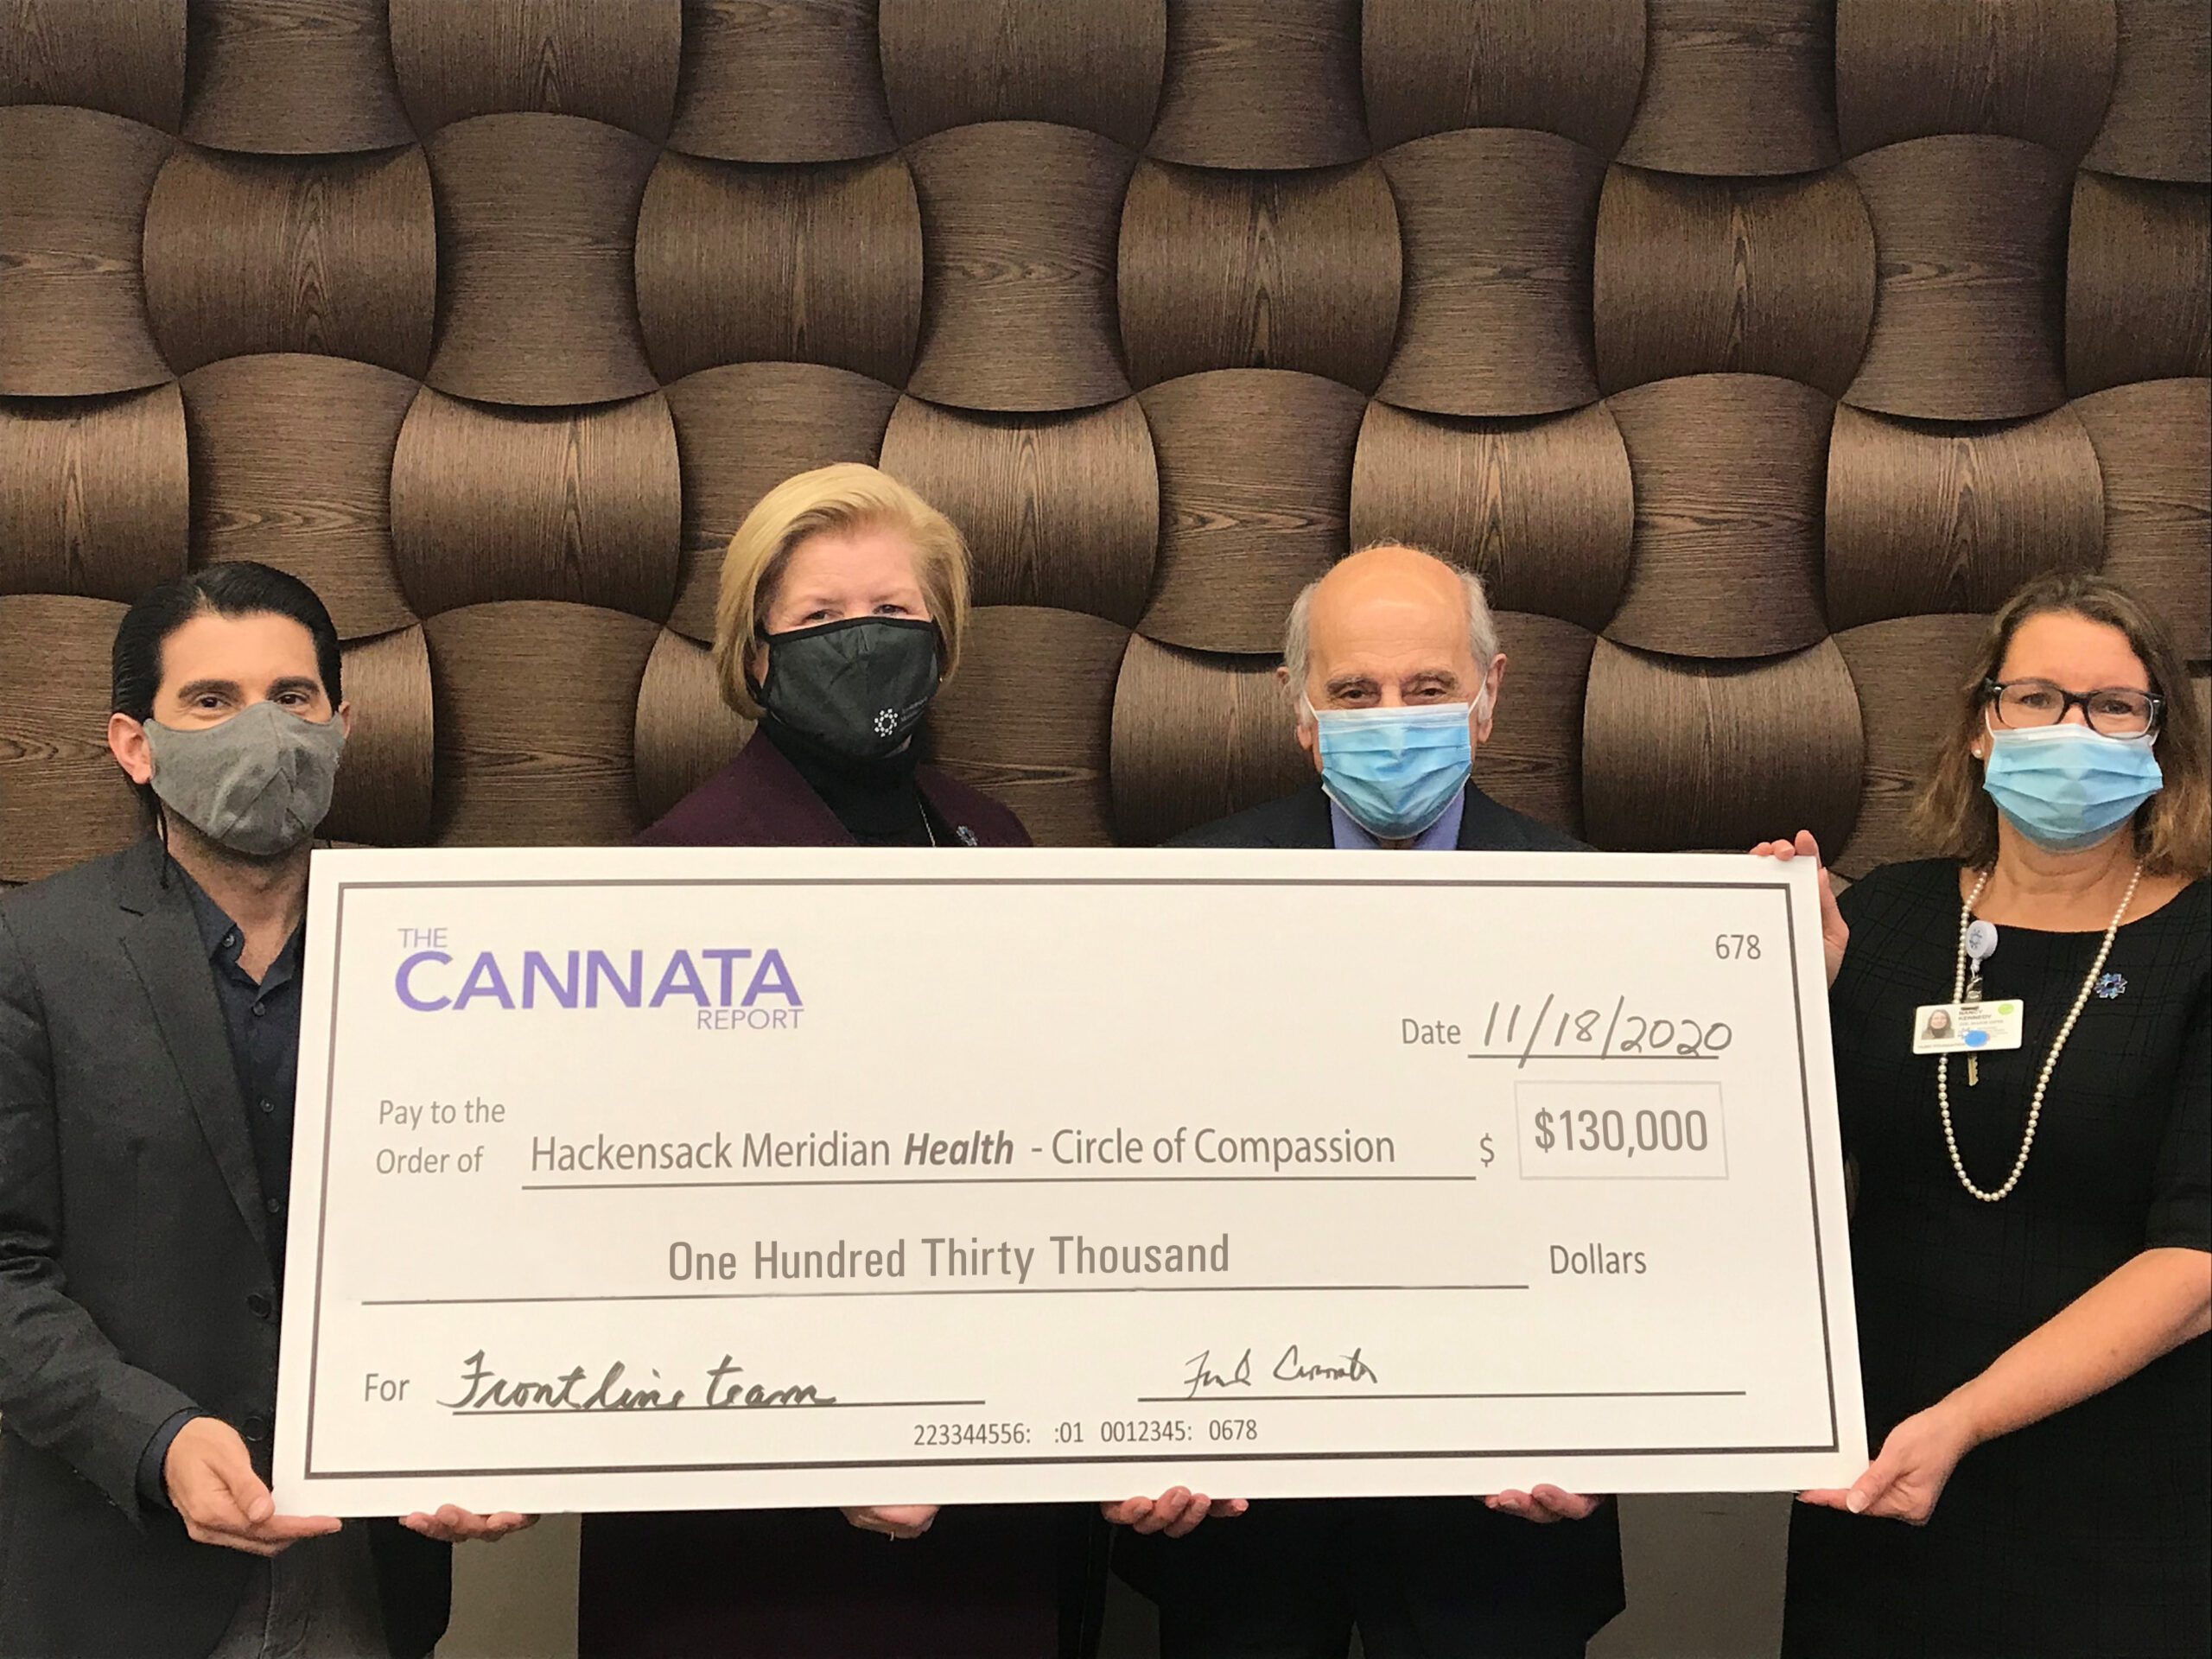 The Cannata Report Raises More Than $130,000 for Hackensack Meridian Health’s Circle of Compassion Program